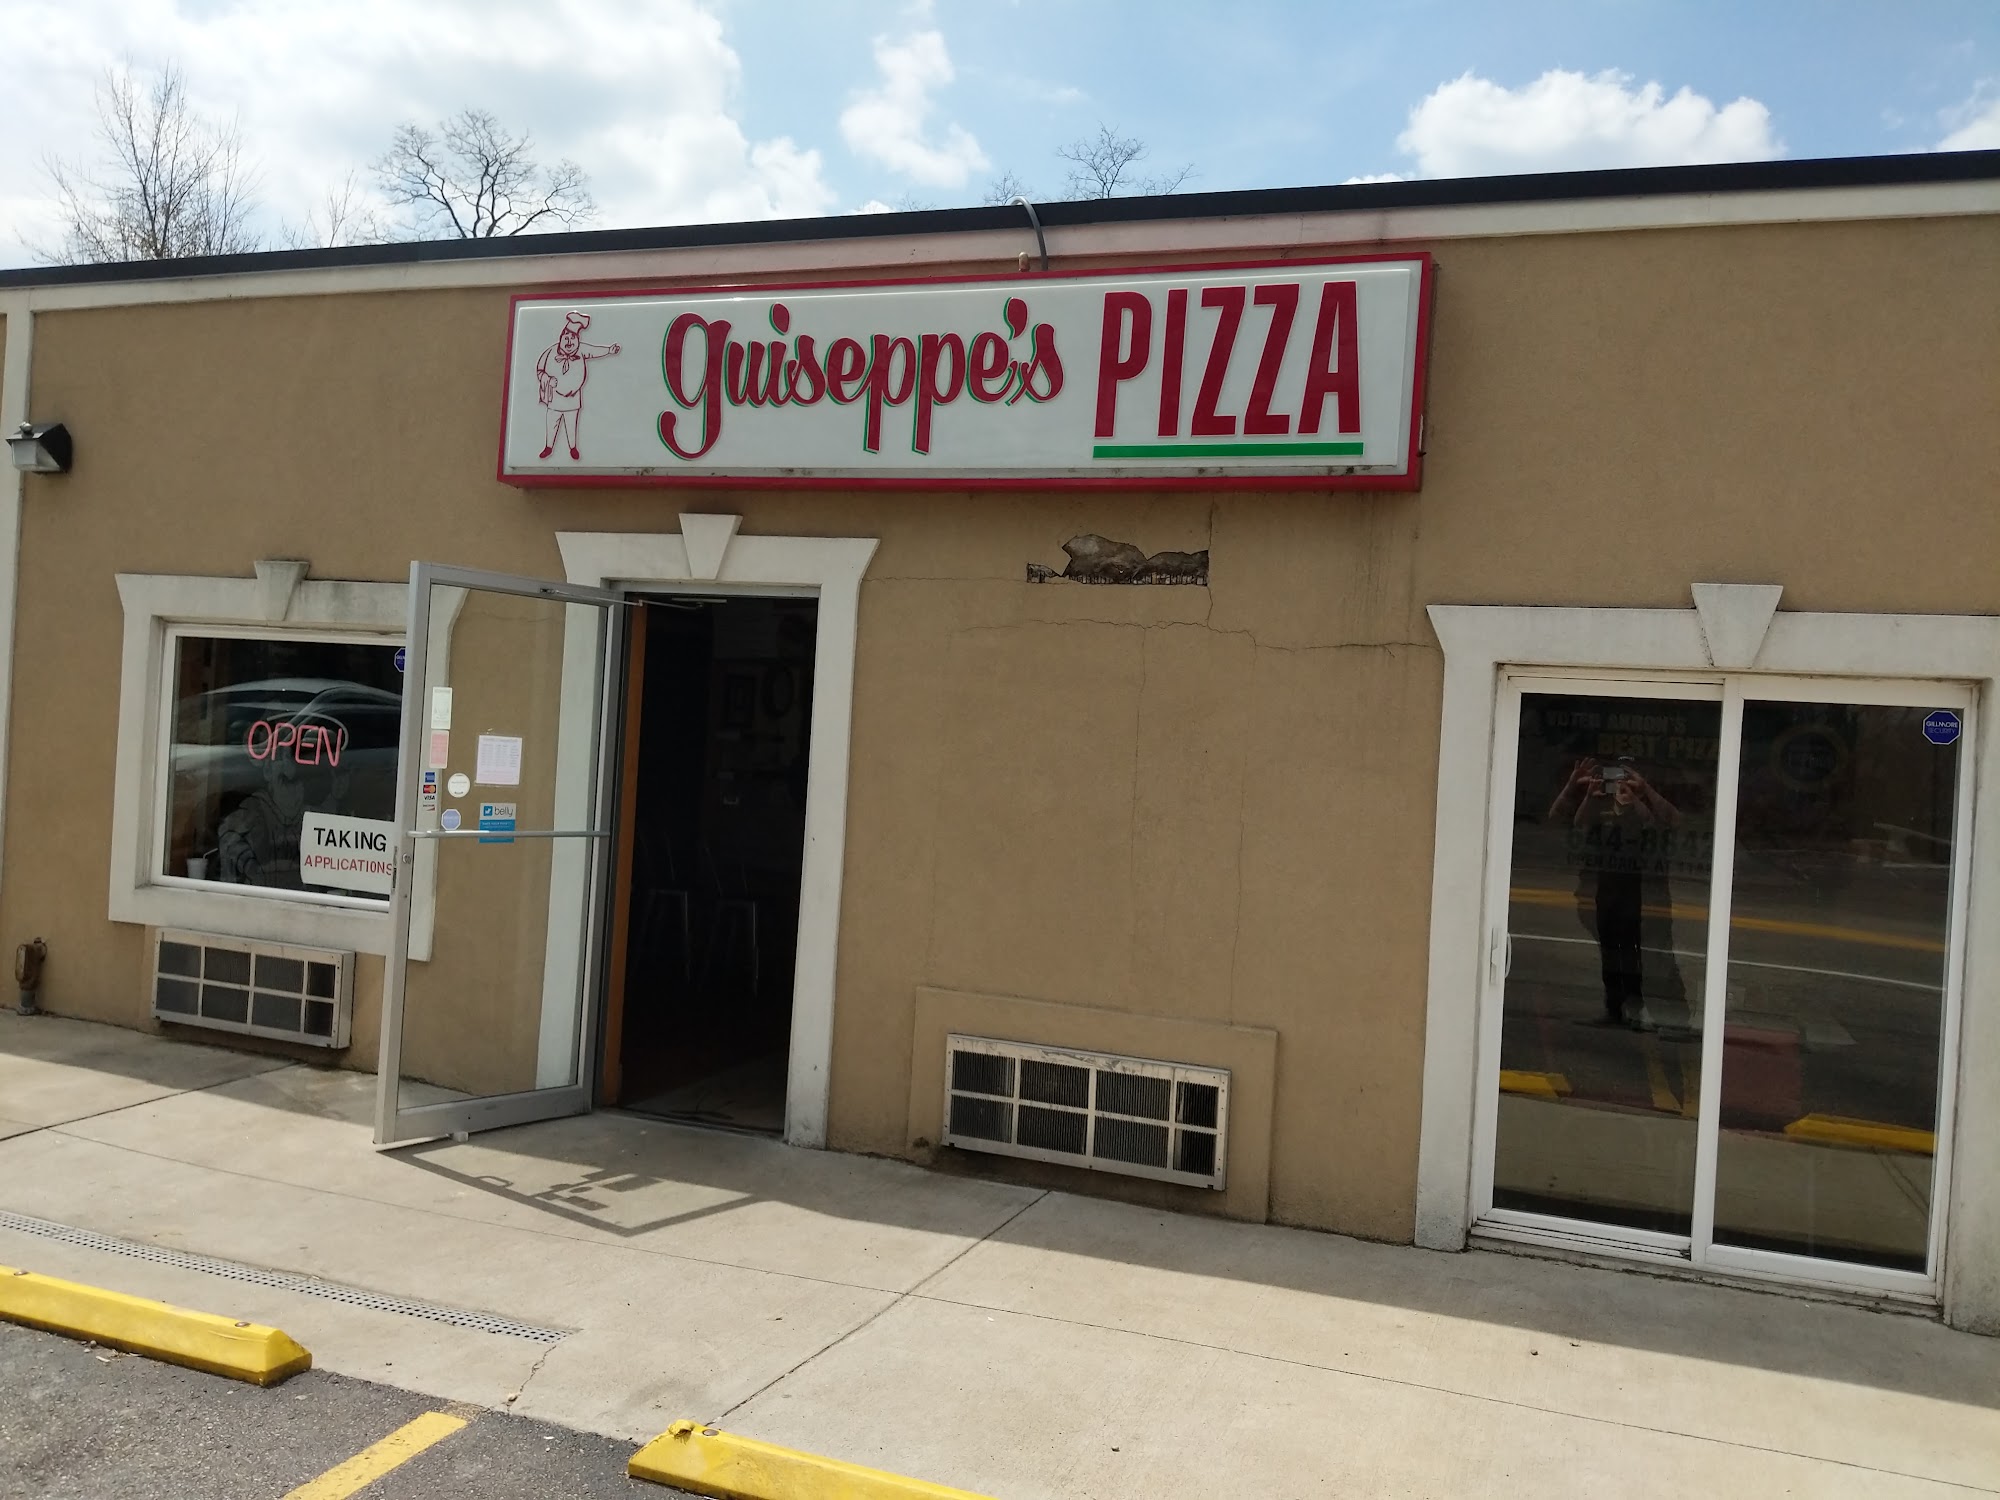 Guiseppe's Pizza